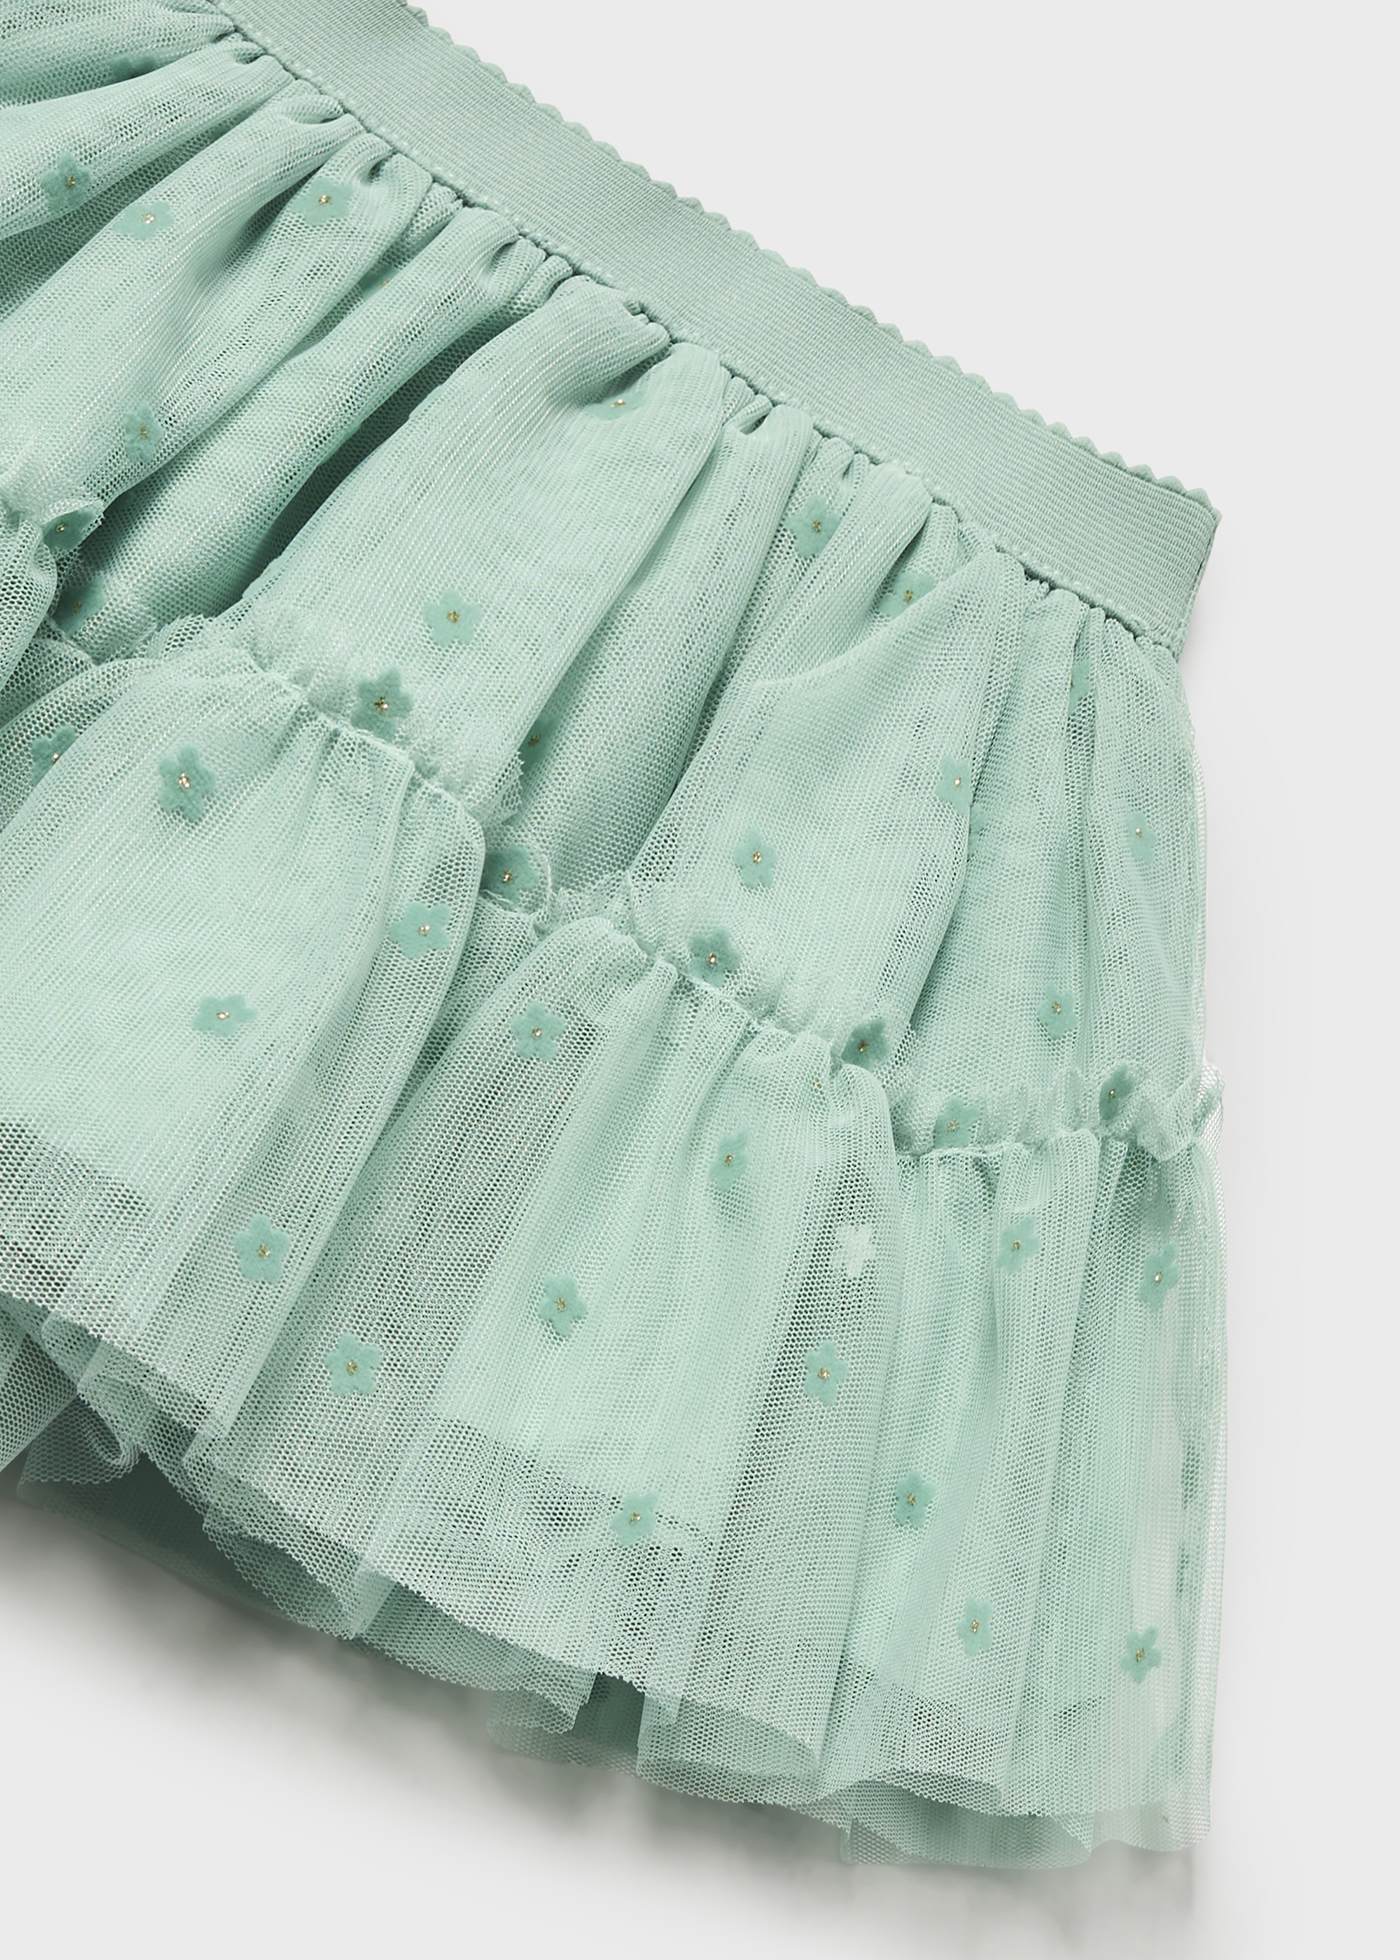 Baby Set with Tulle Skirt